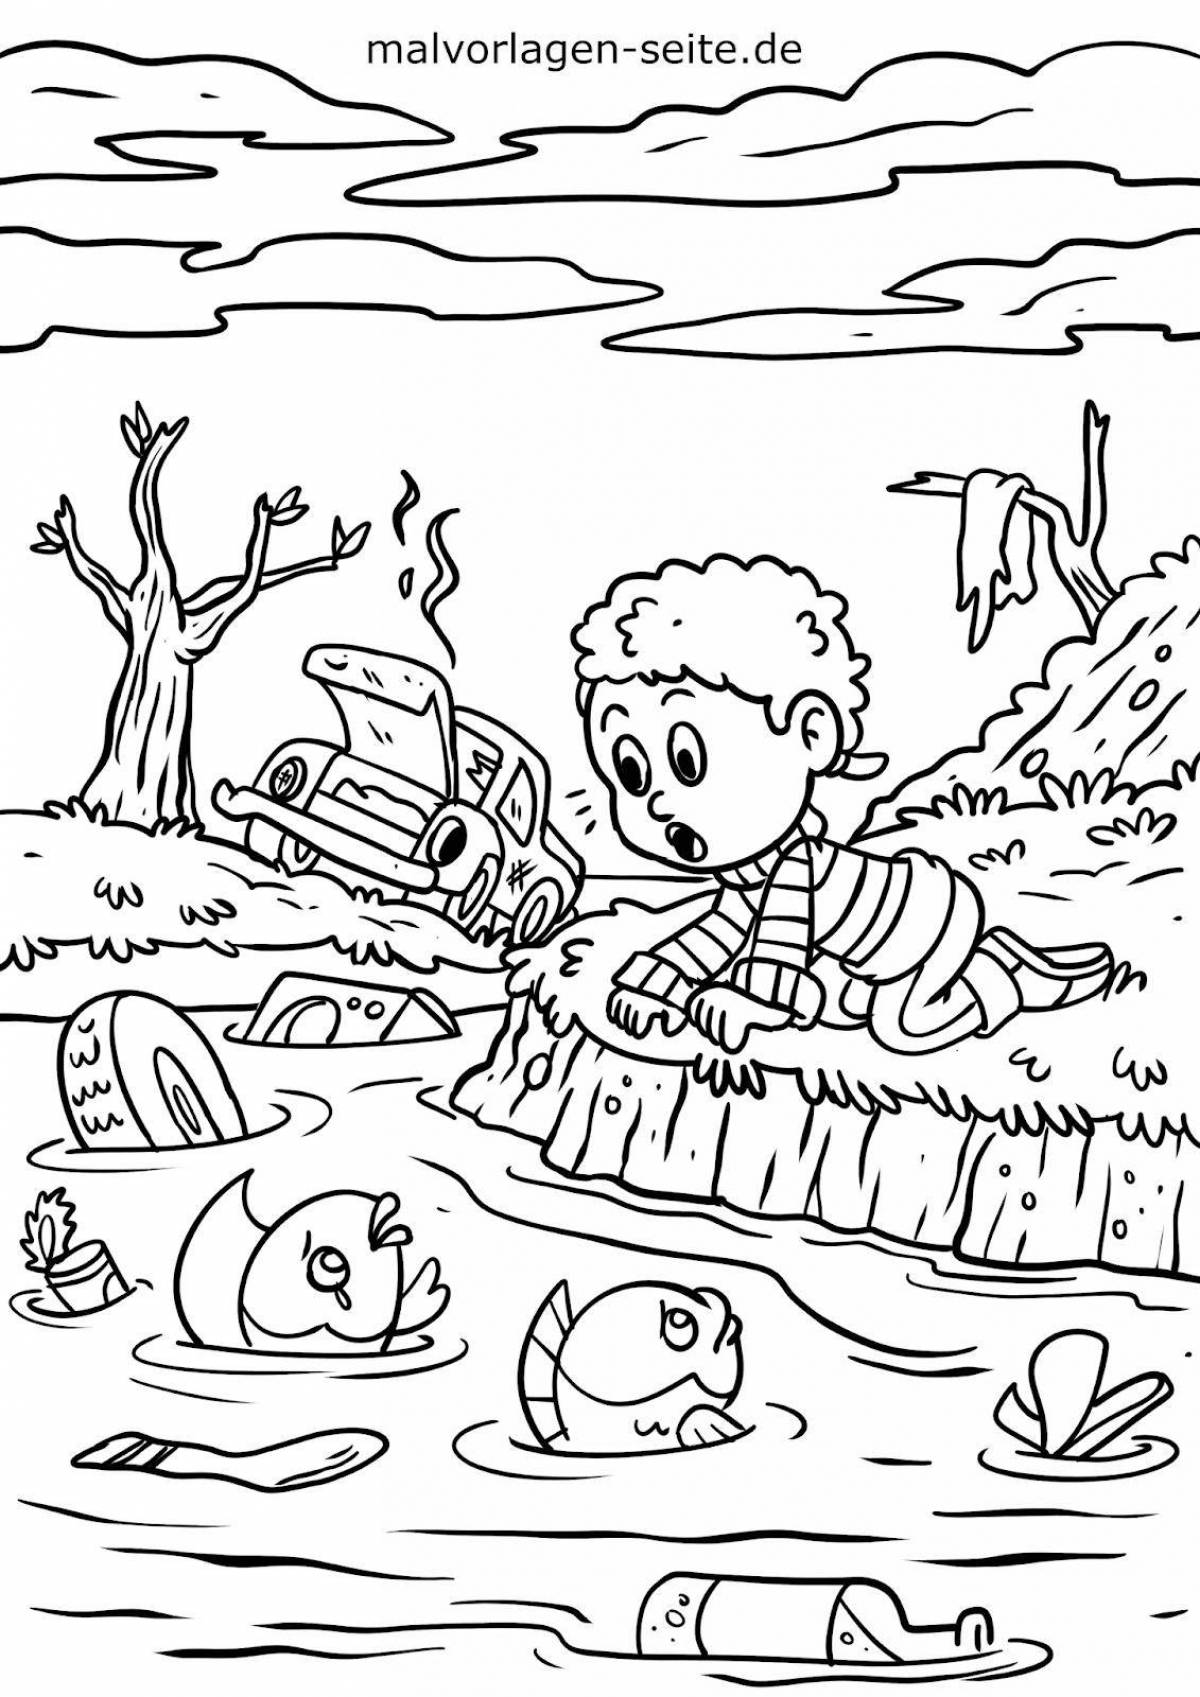 Fun eco-friendly coloring book for elementary grades